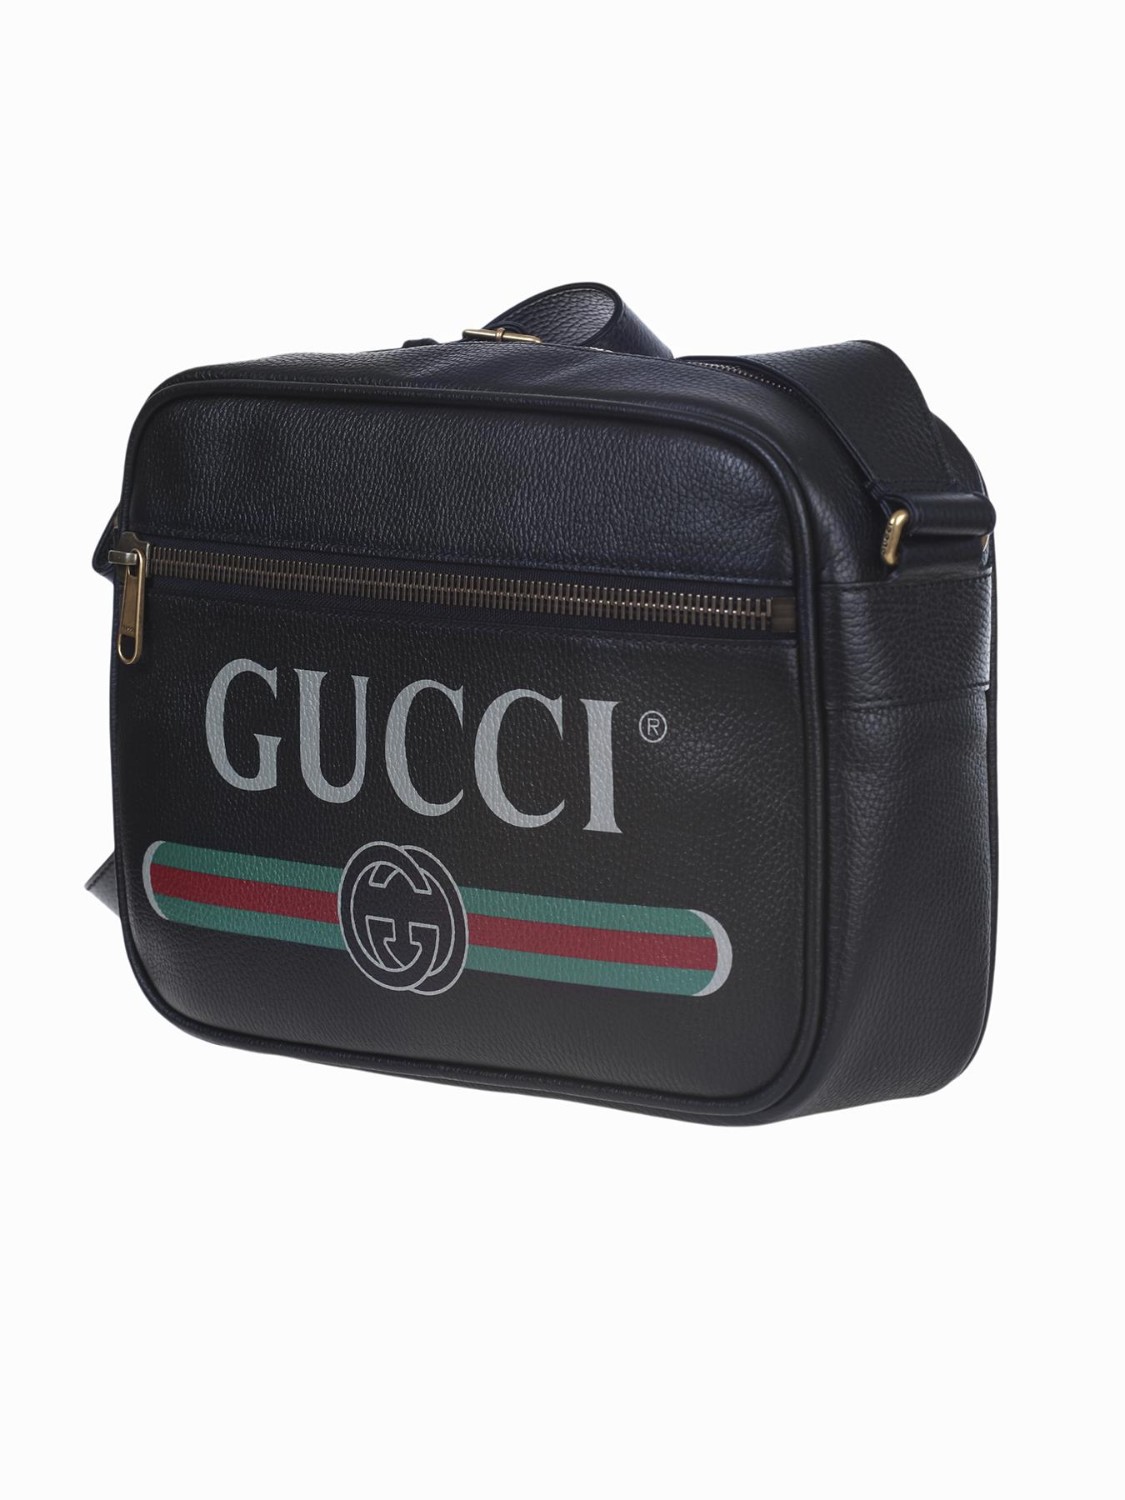 shop GUCCI Saldi Borsa: Gucci Black leather with Gucci vintage logo crossbody bag.
Brass hardware.
Front zipper pocket.
Interior zipper pocket and two smartphone pockets.
Adjustable leather strap with 19.5" drop.
Top zipper closure.
Dimensions: Length 33.5 cm, Height 23.5 cm, Depth 9.5 cm.
Cotton and linen lining.
Made in Italy.. 523589 0QRAT-8163 number 8209680